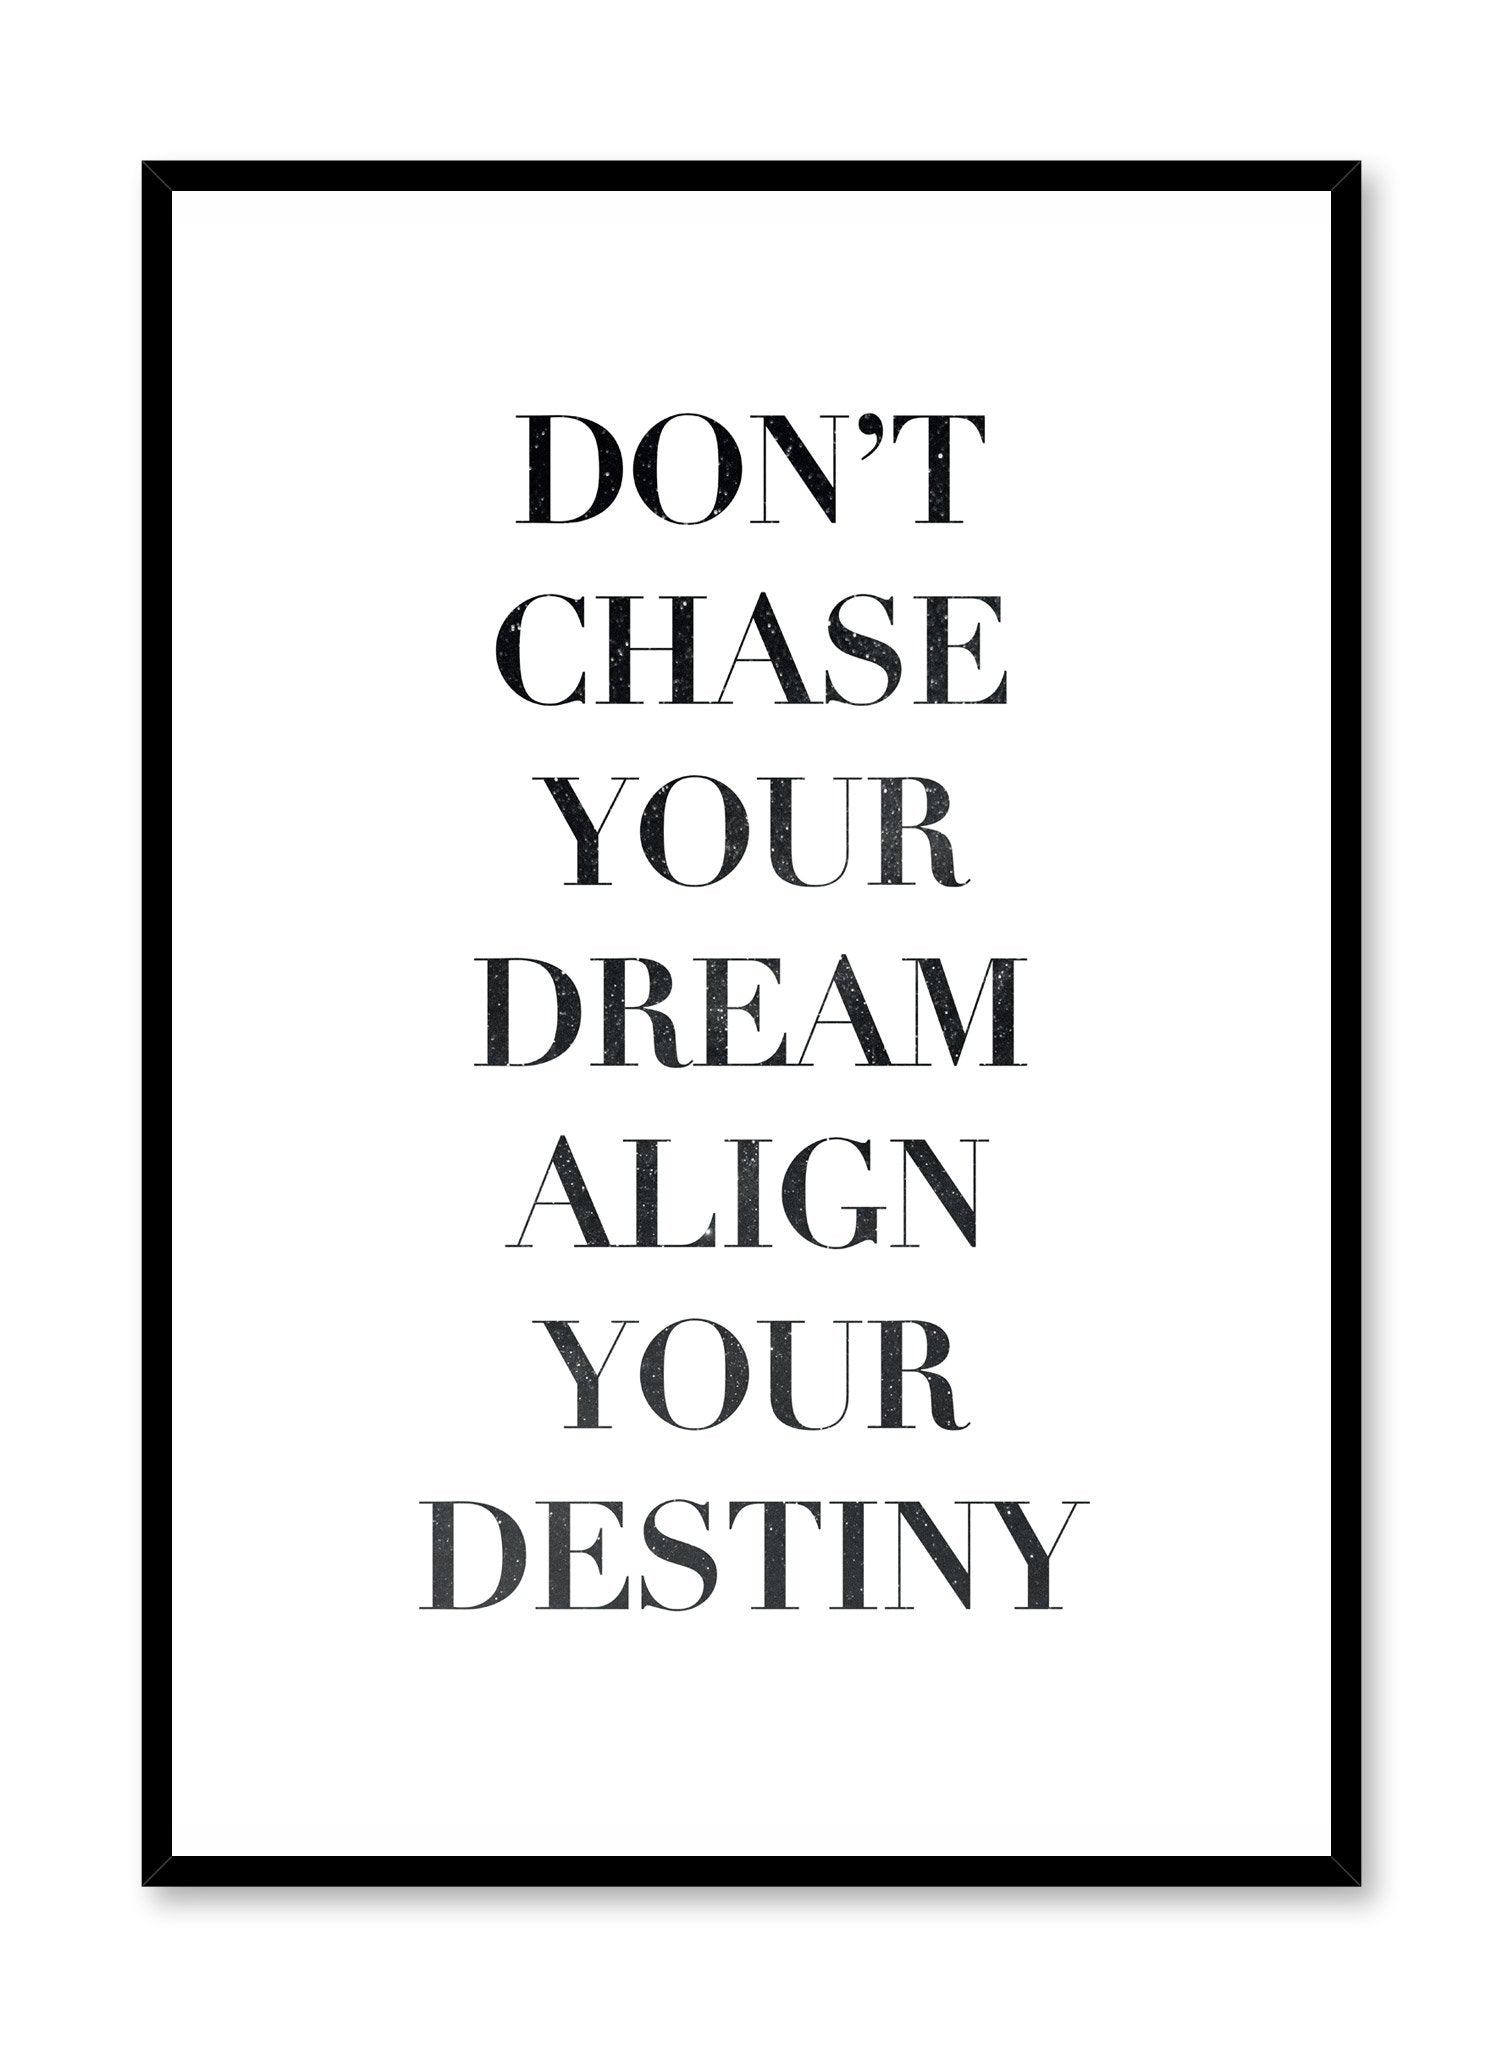 Modern minimalist celestial typography poster with quote Align Your Destiny